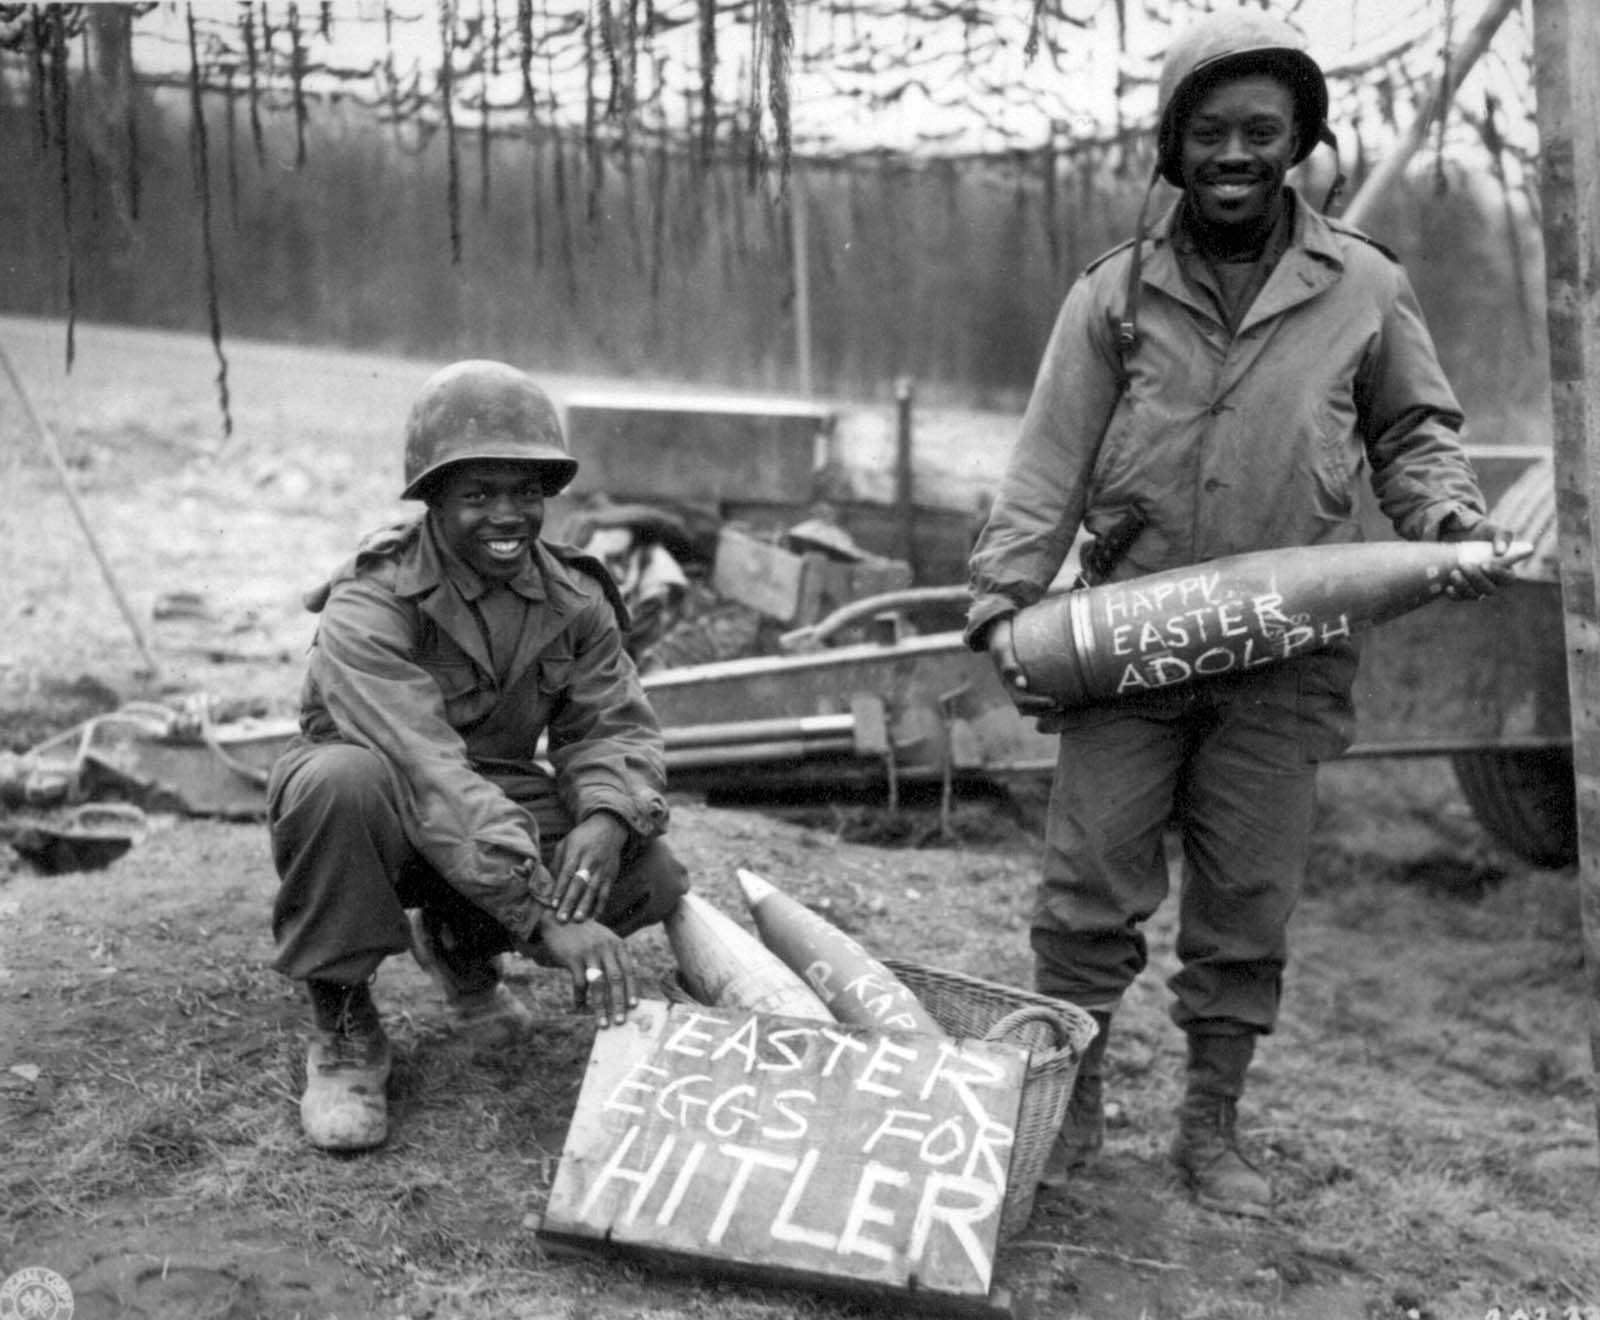 happy easter adolf ww2 picture